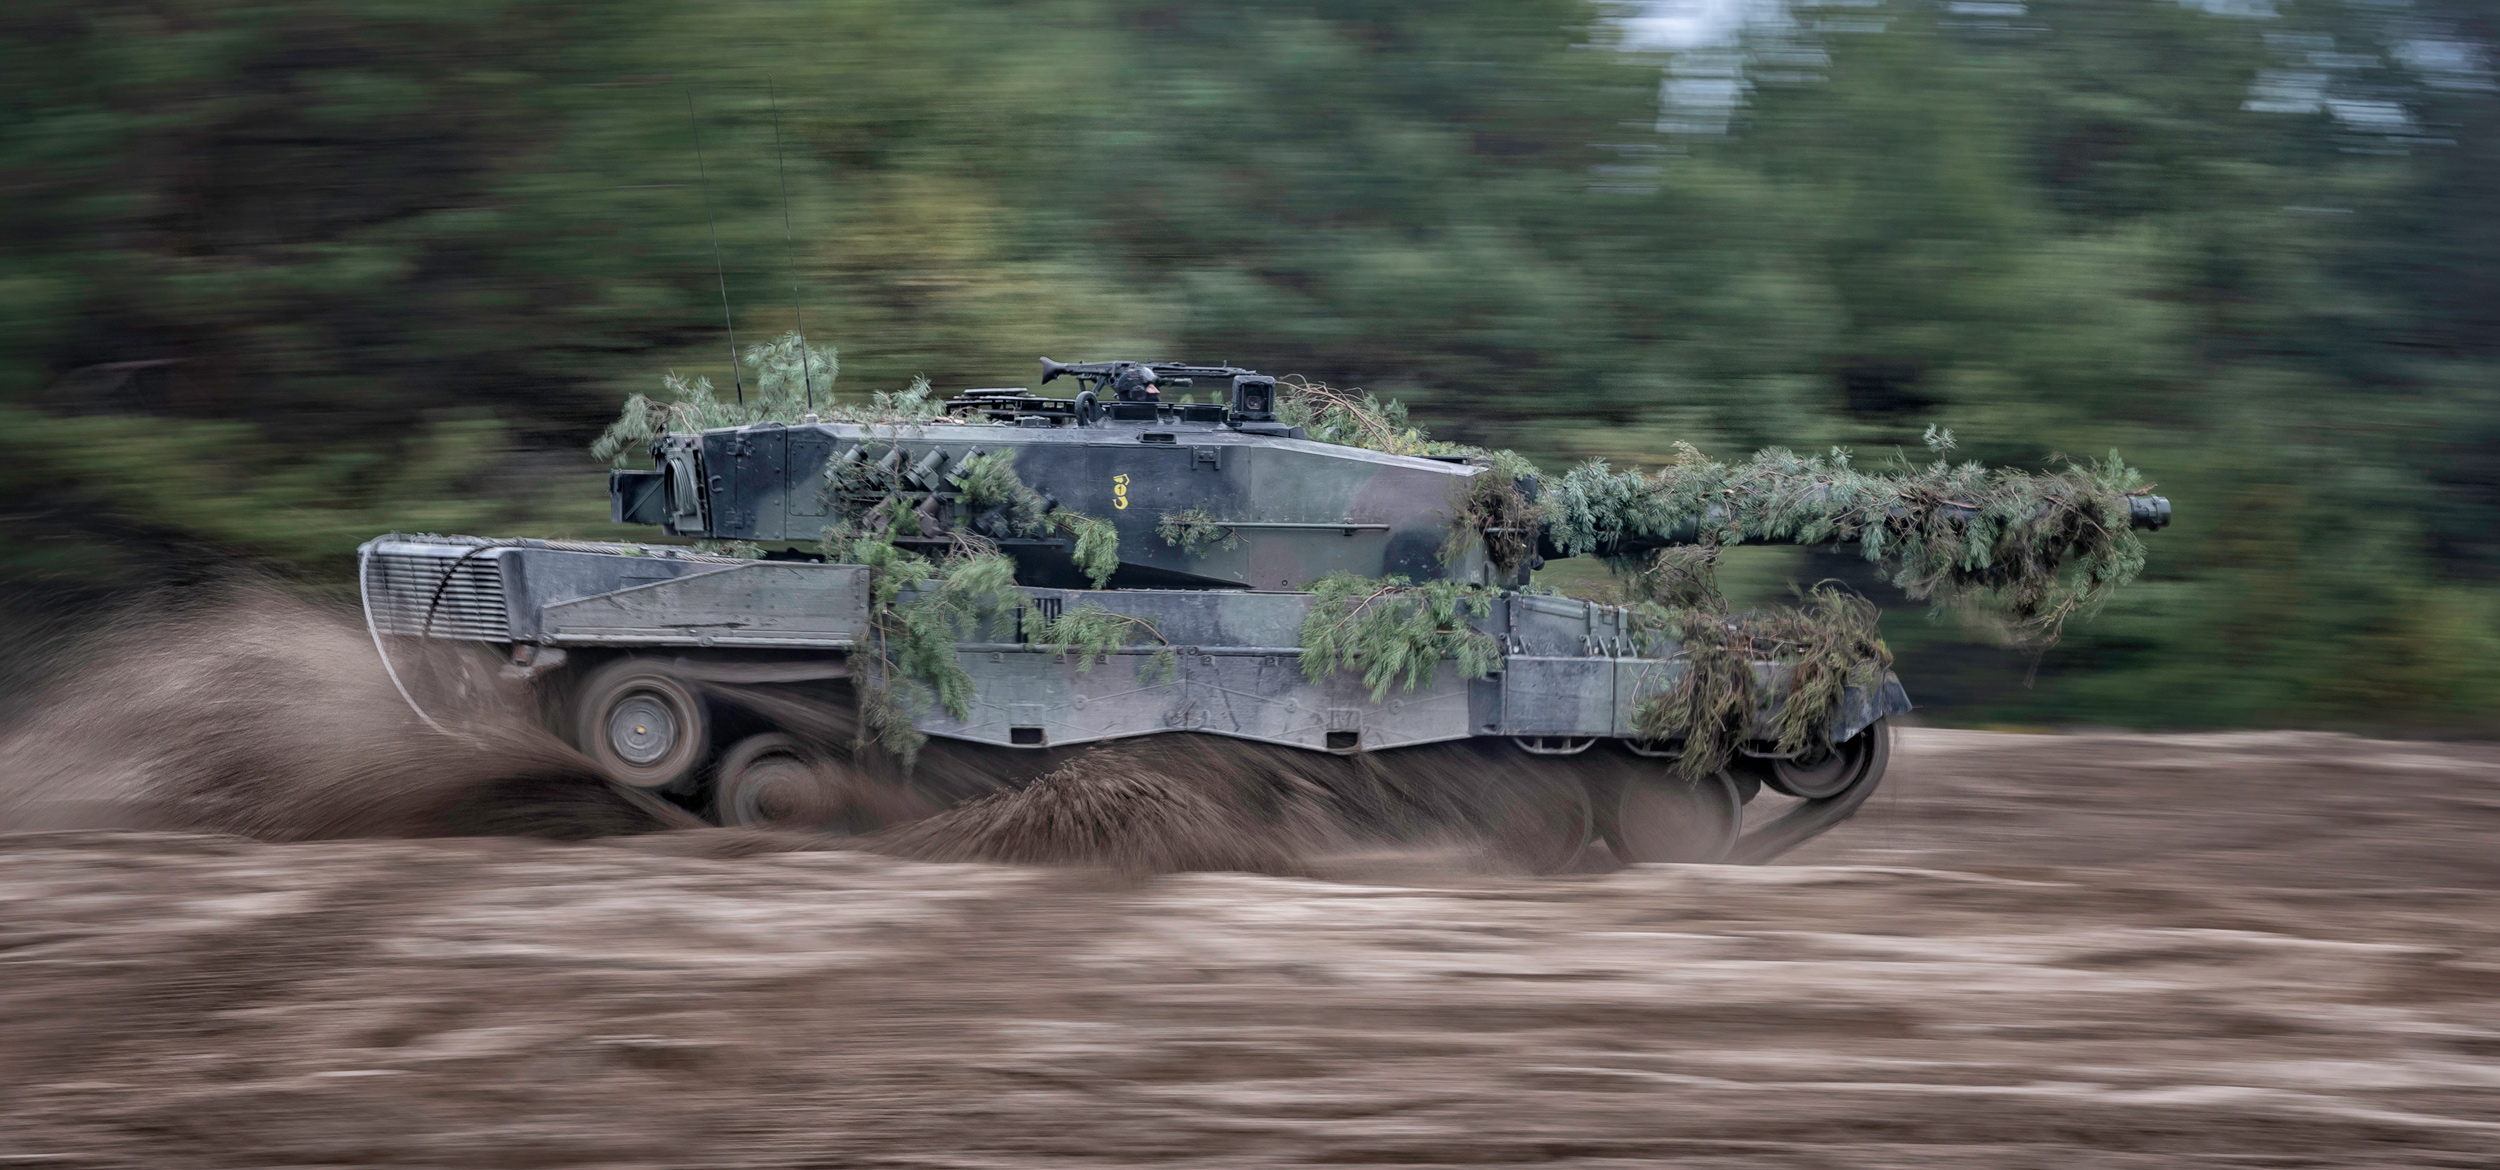 Slovakia received the first German Leopard 2A4 tank to replace the BMP-1s that were transferred to Ukraine